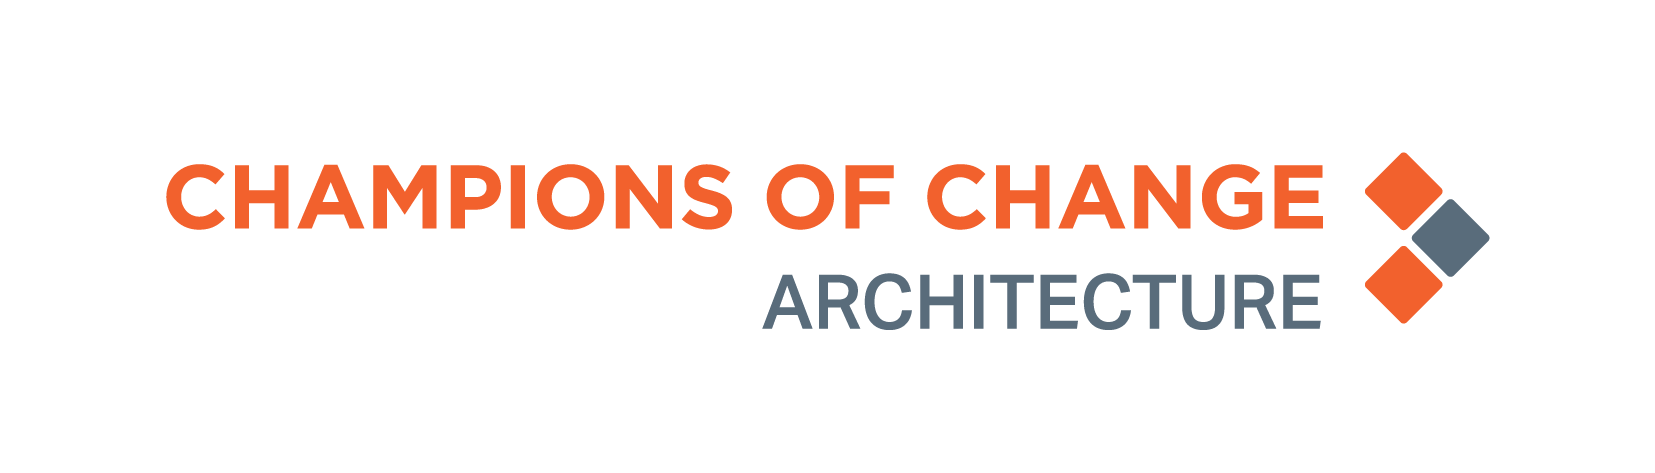 Champions of Change Architecture Group Logo